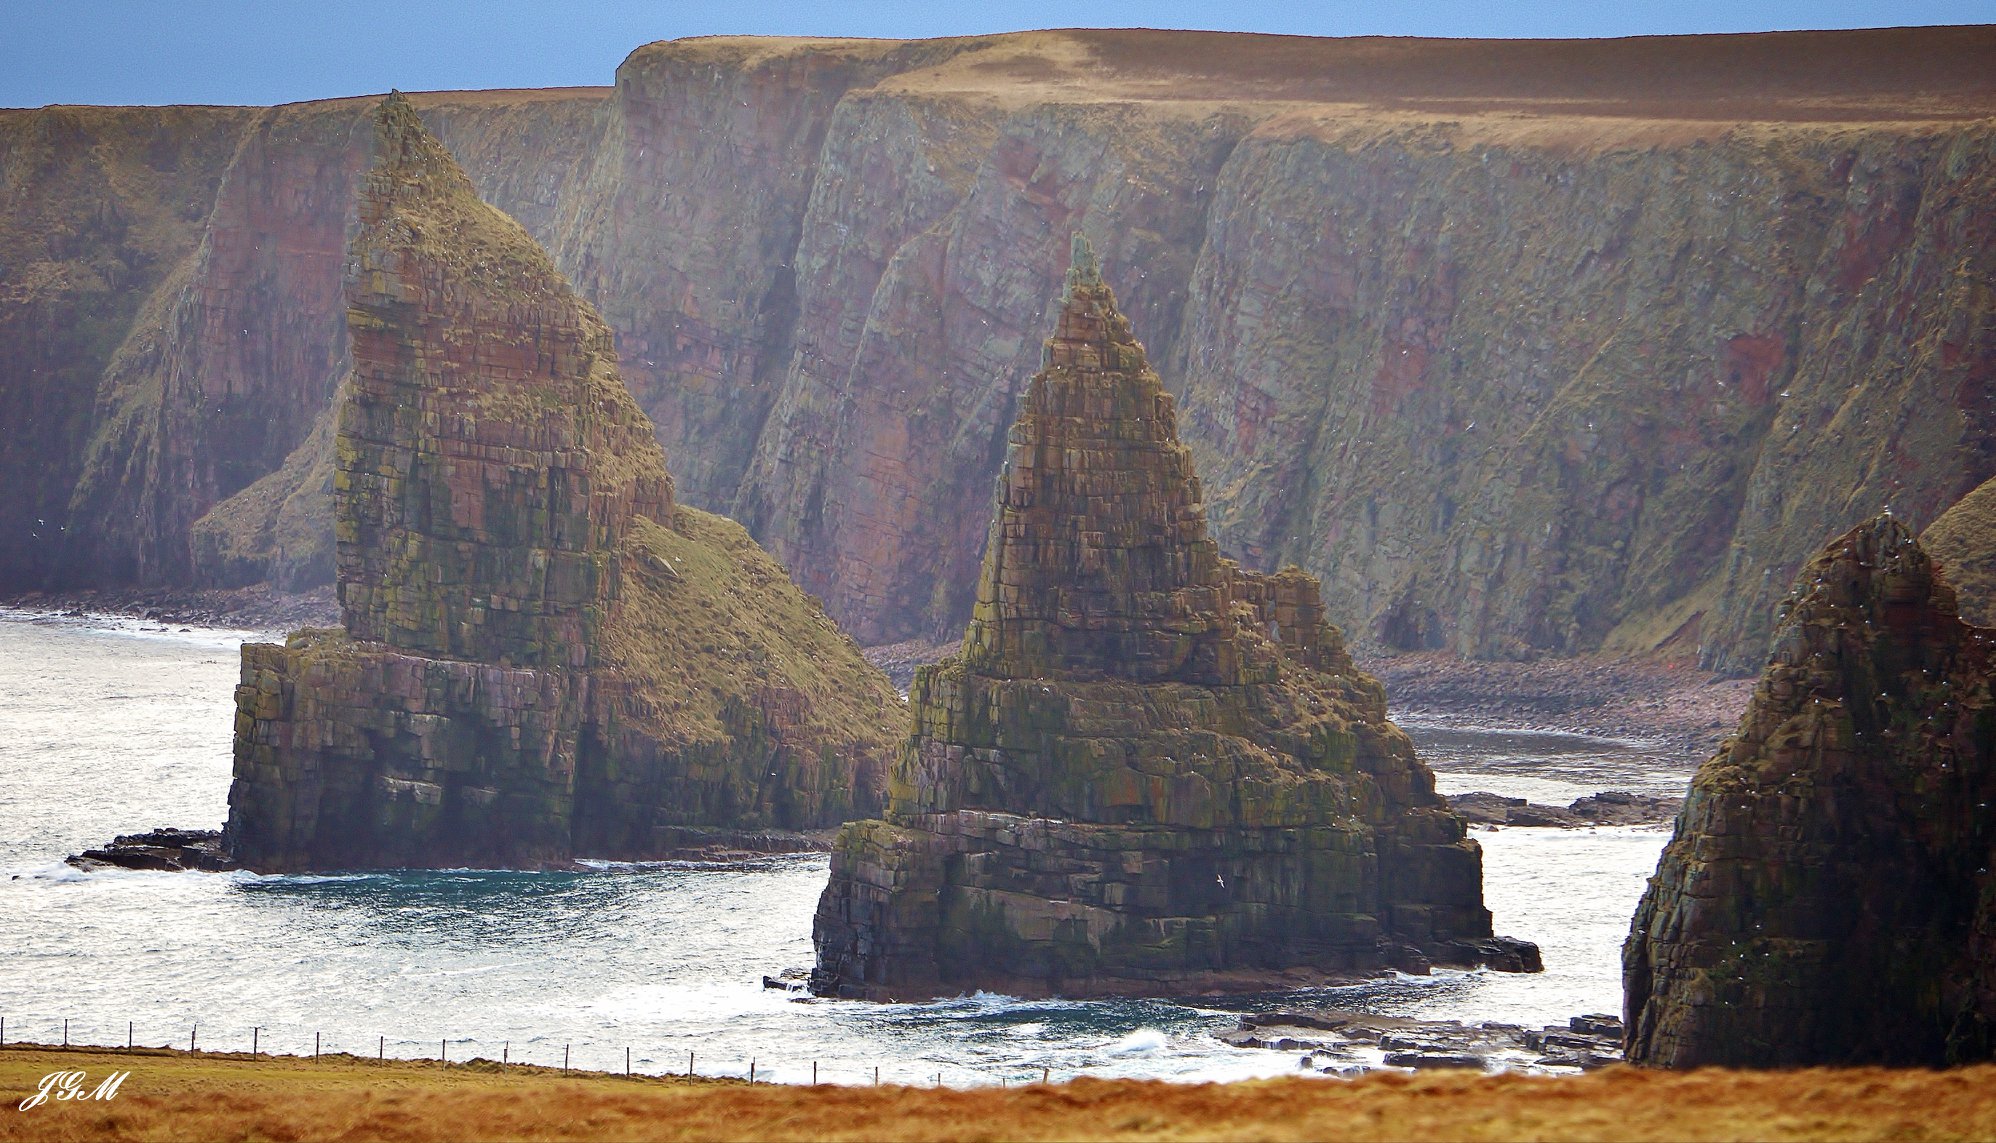 Duncansby Sea Stacks at John O' Groats on the Northern Coast of Scotland